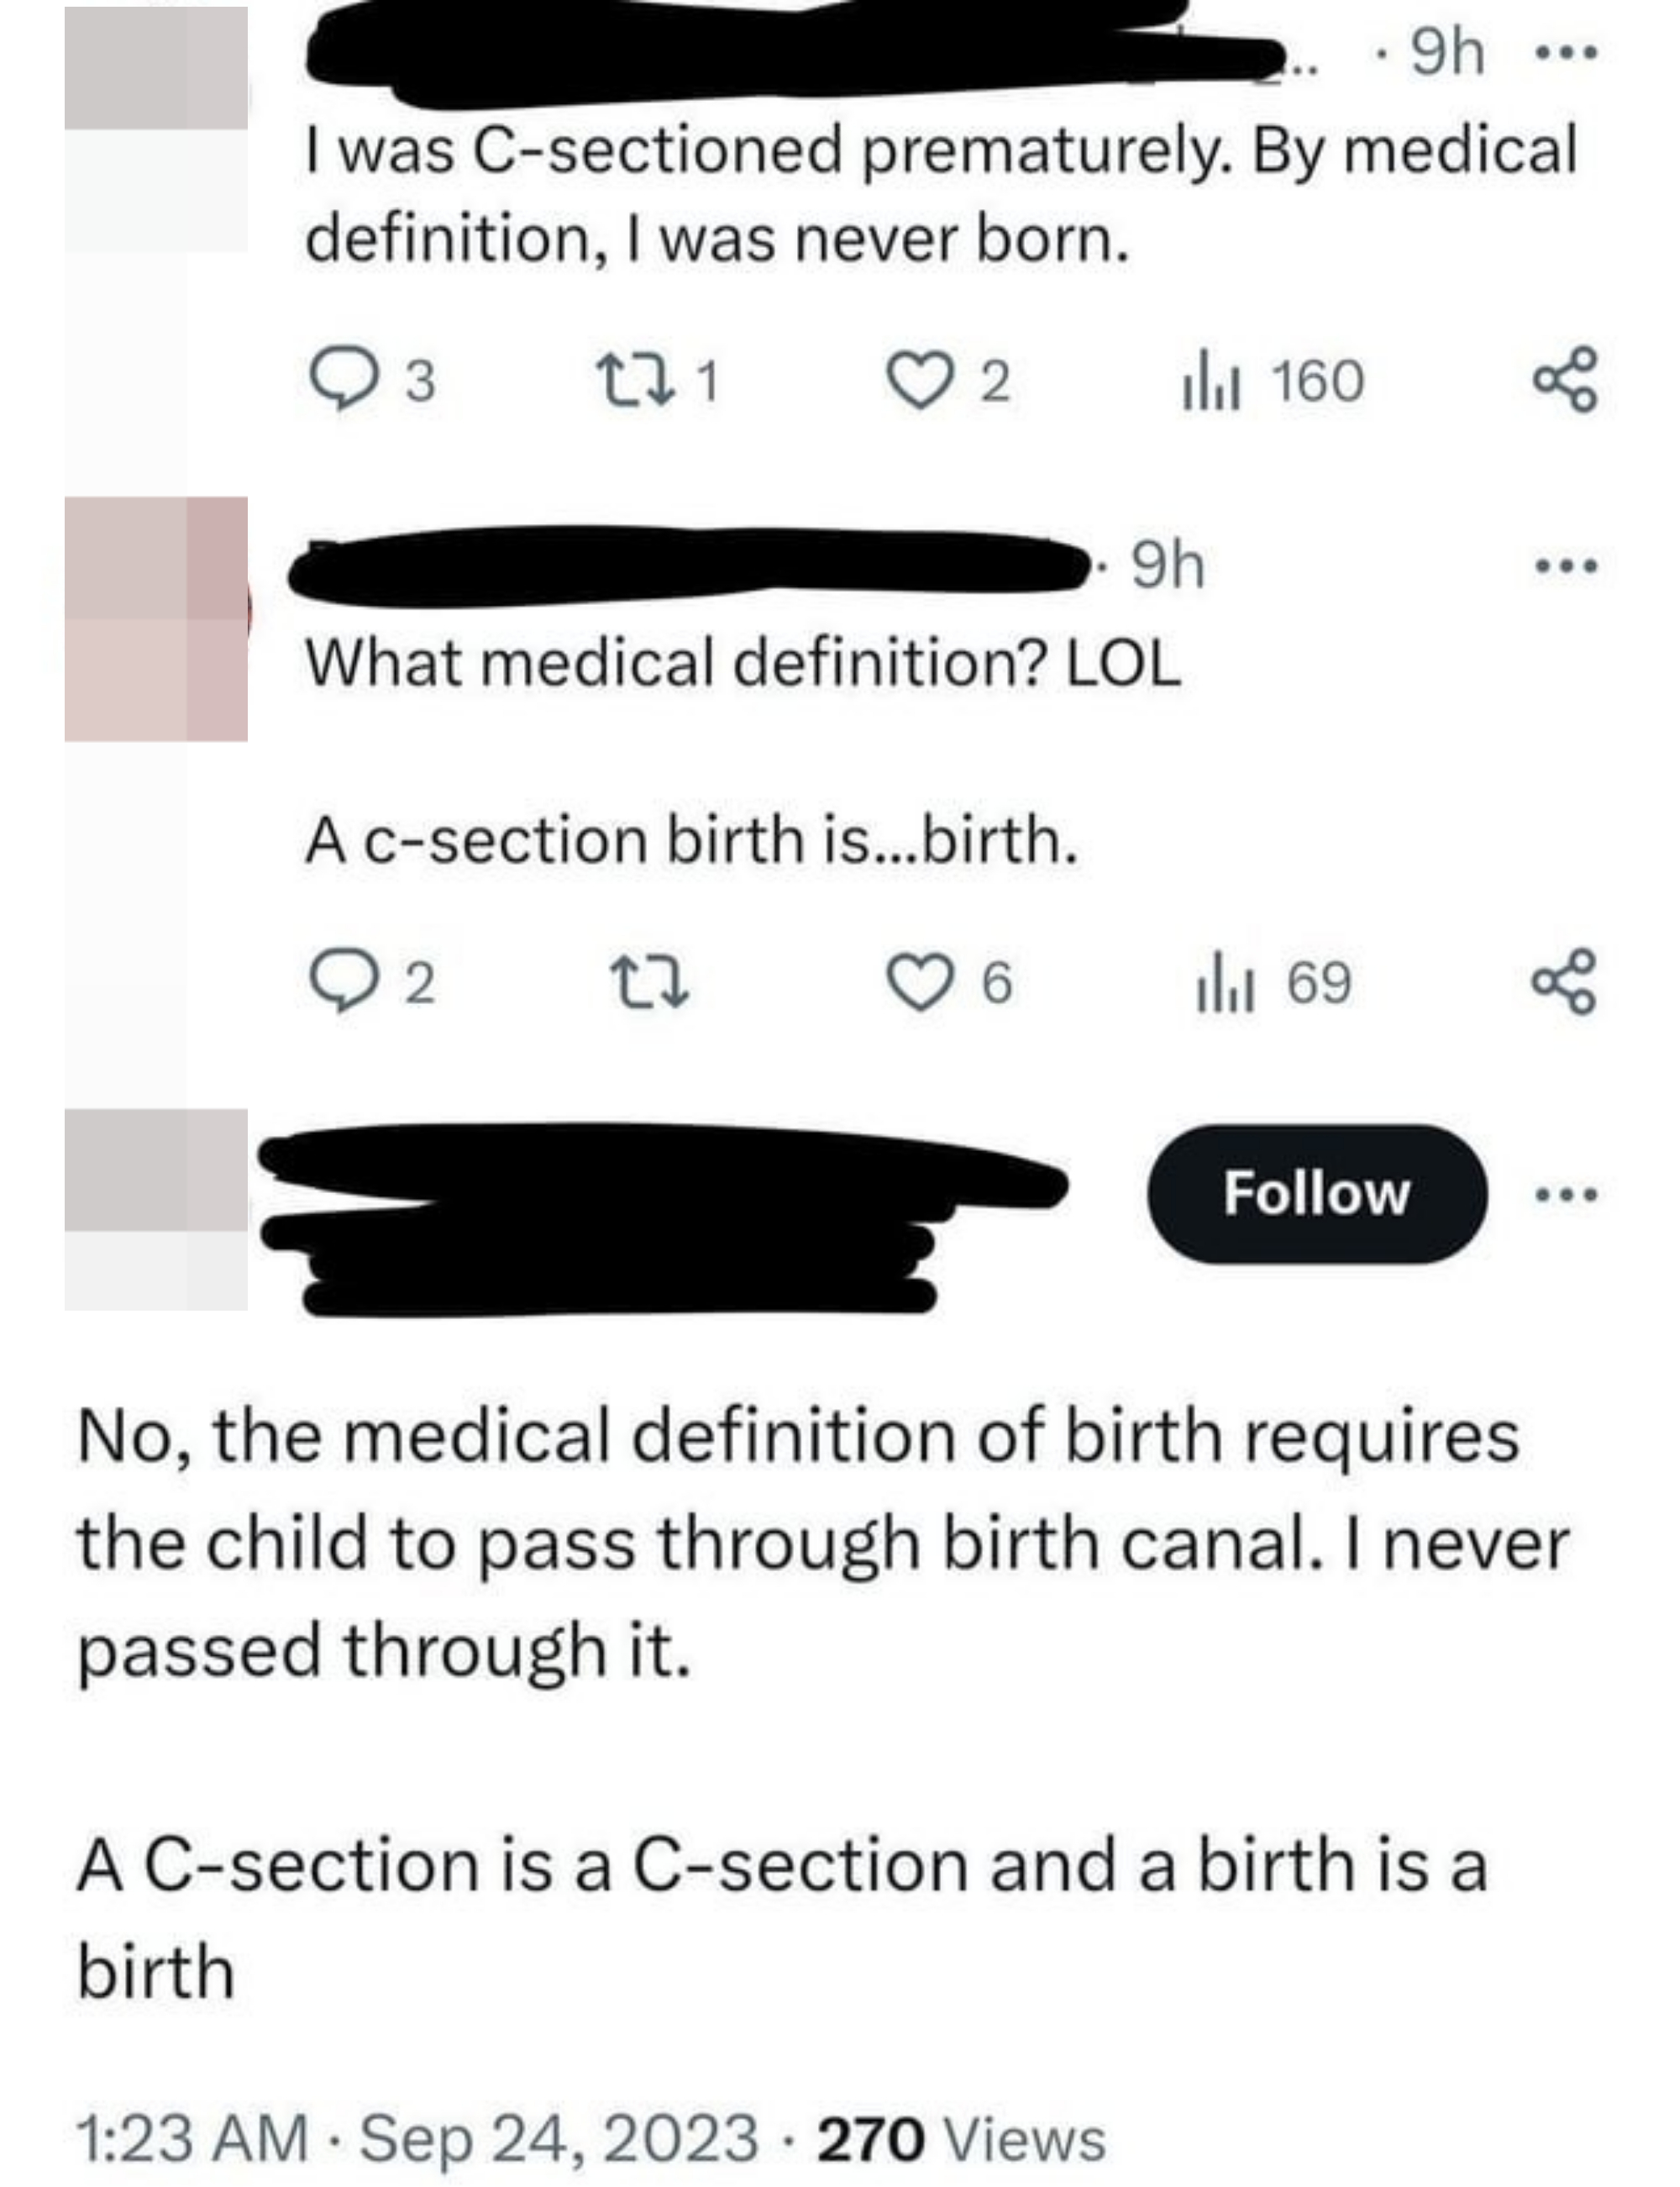 &quot;No, the medical definition of birth requires the child to pass through birth canal.&quot;